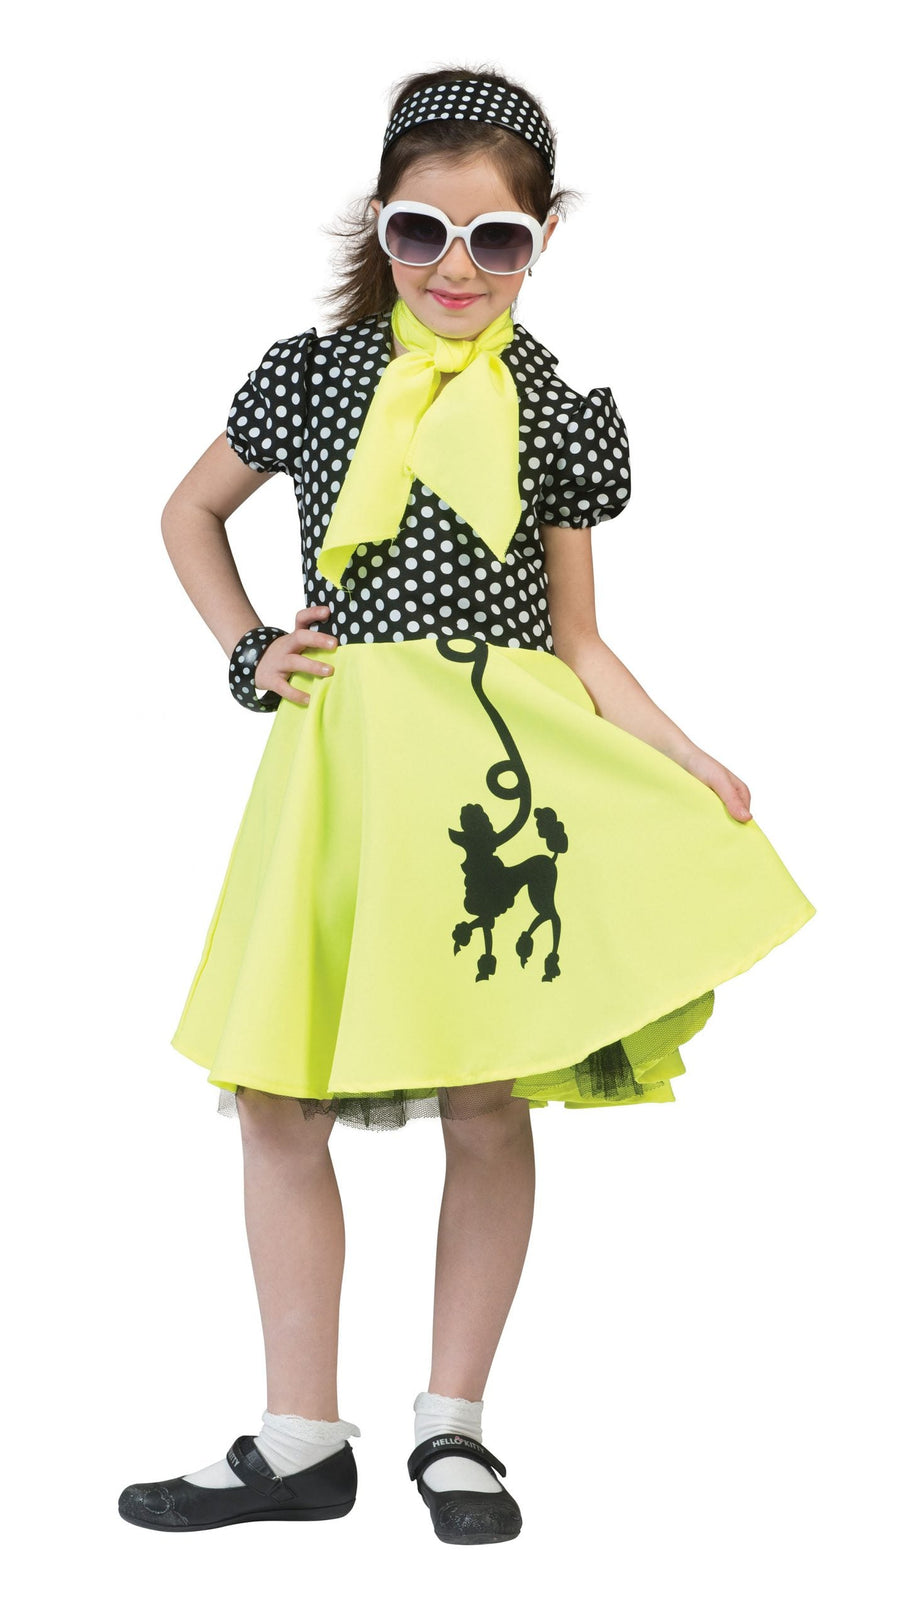 Poodle Dress Yellow with Black Medium Childrens Costume Female_1